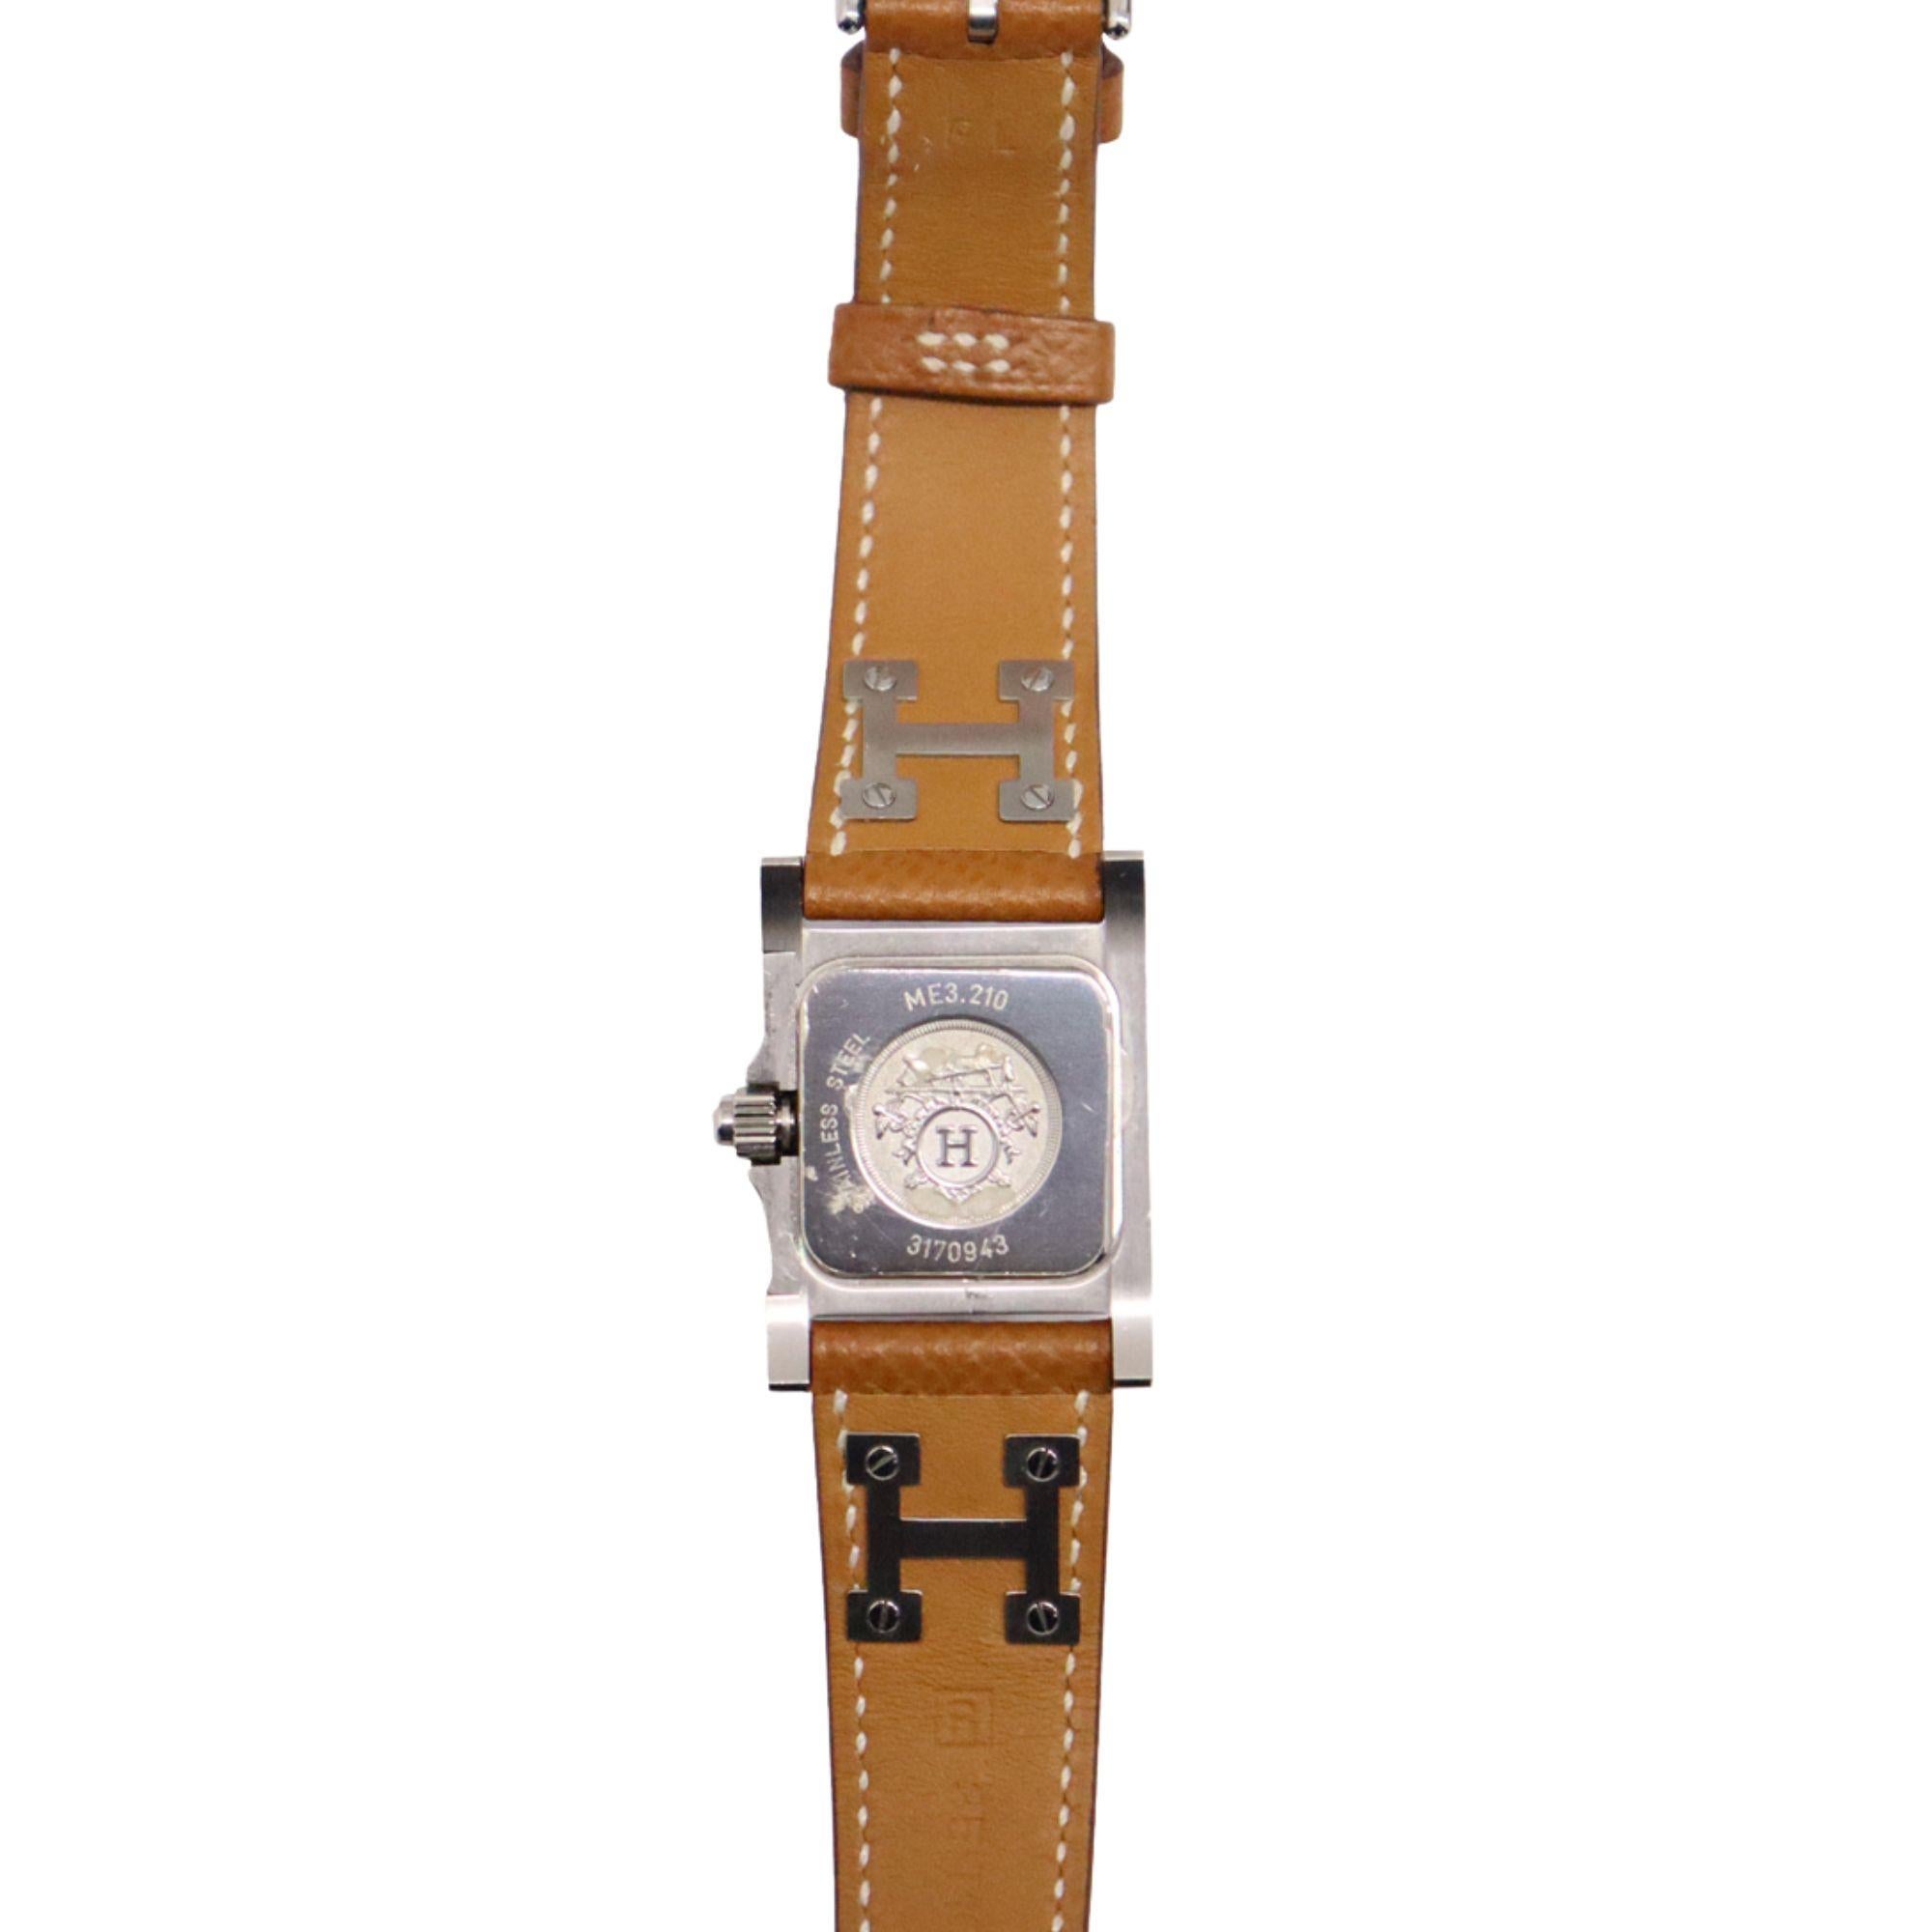 Hermes Medor Steel Watch in Gold Chestnut, Features:

- Steel case
- Anti-glare sapphire crystal
- Opaline silvered dial
- Quartz movement, Swiss Made
- Hour, minute functions
- Water-resistant to 3 bar. 
- Long single tour strap in gold Epsom